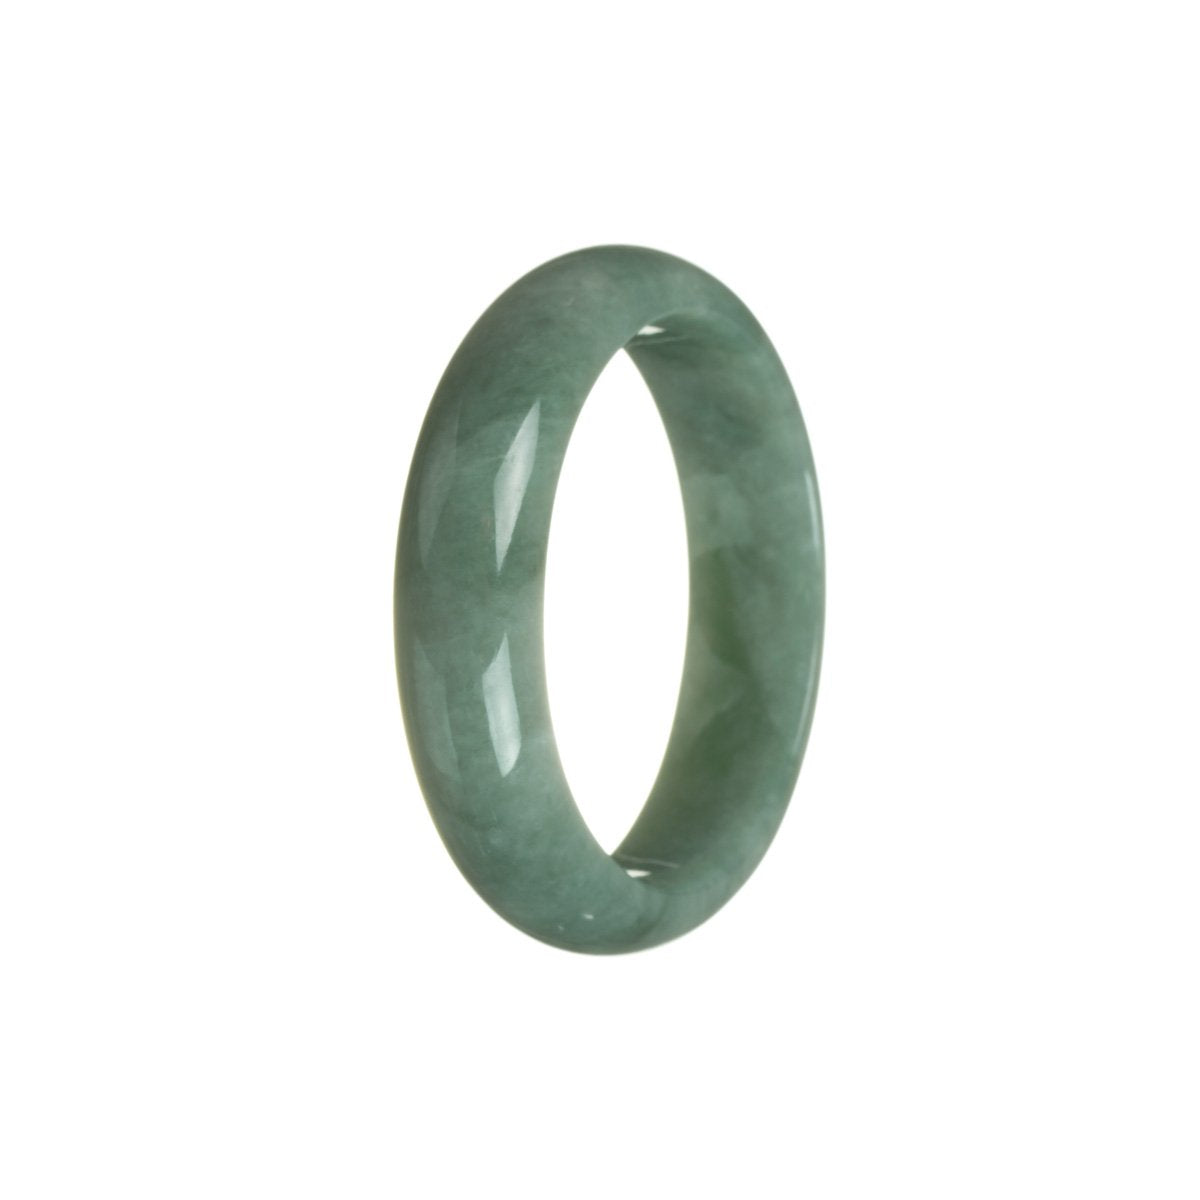 A stunning oval-shaped Grade A Green Jadeite bangle bracelet, certified for its exceptional quality. The bracelet measures 58mm, making it a perfect fit for most wrists. A timeless piece from MAYS that exudes elegance and sophistication.